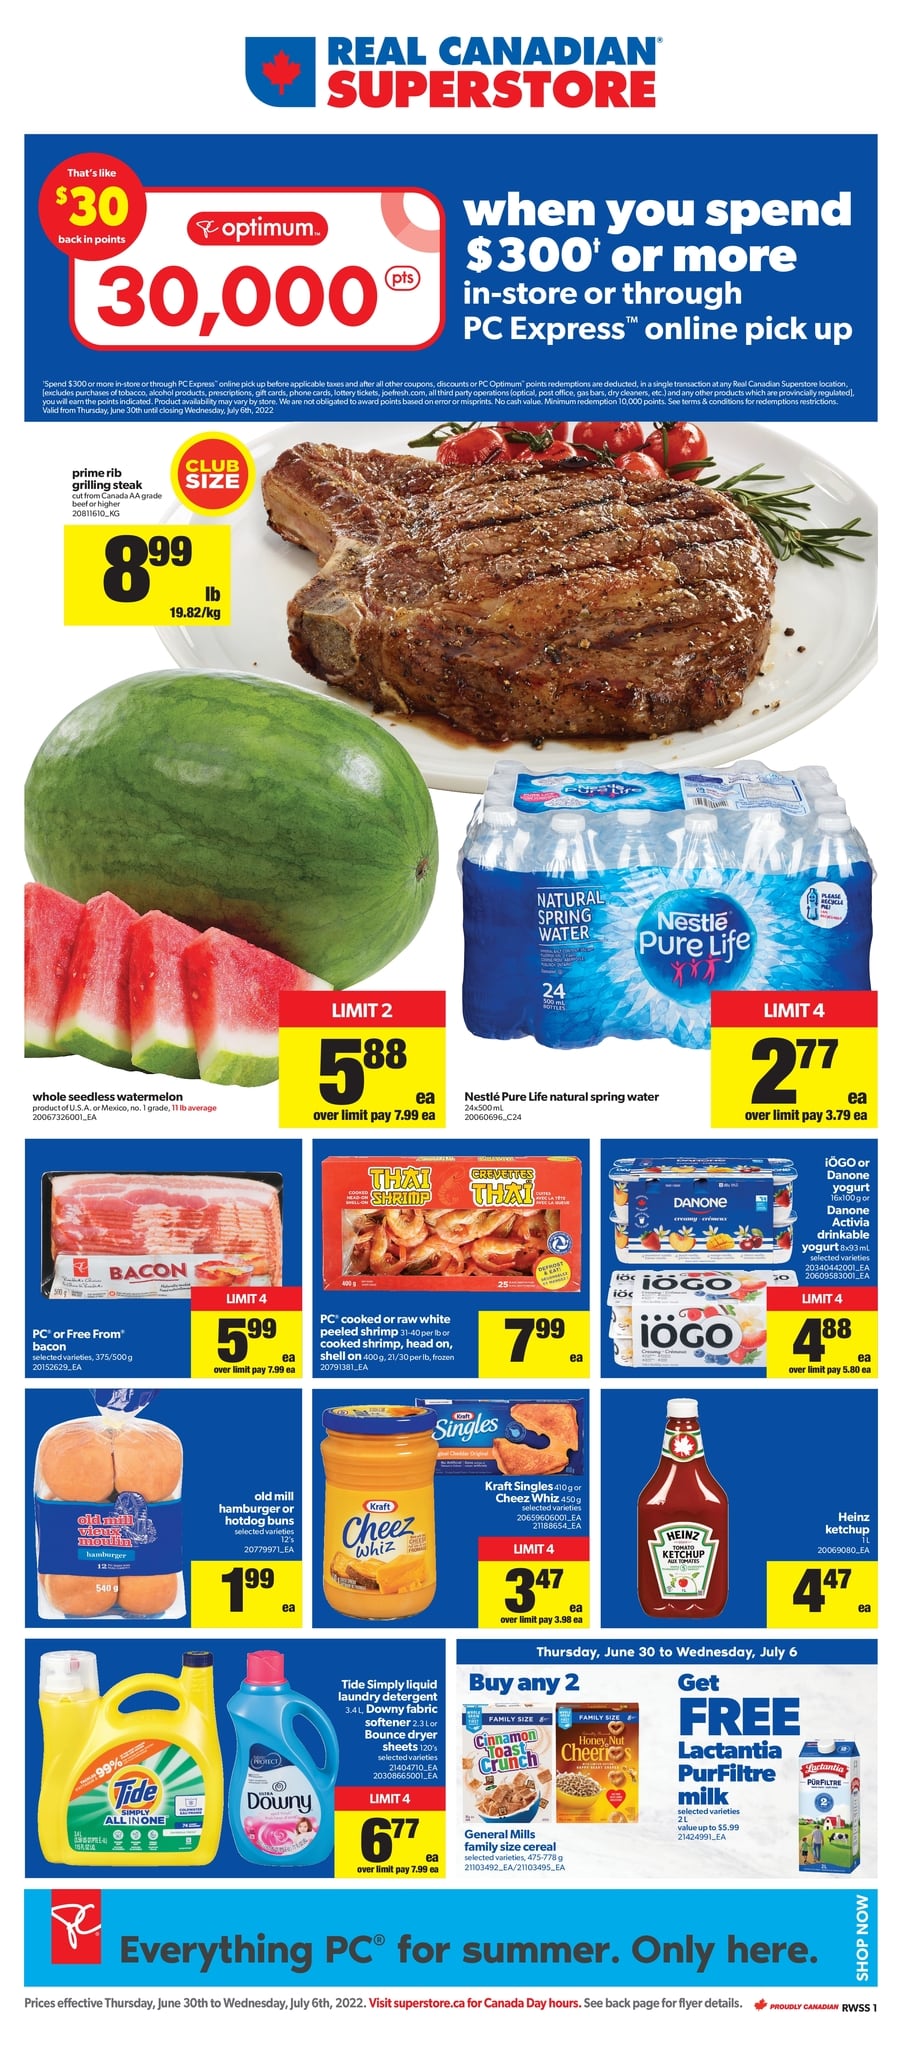 Real Canadian Superstore Western Canada - Weekly Flyer Specials - Page 1